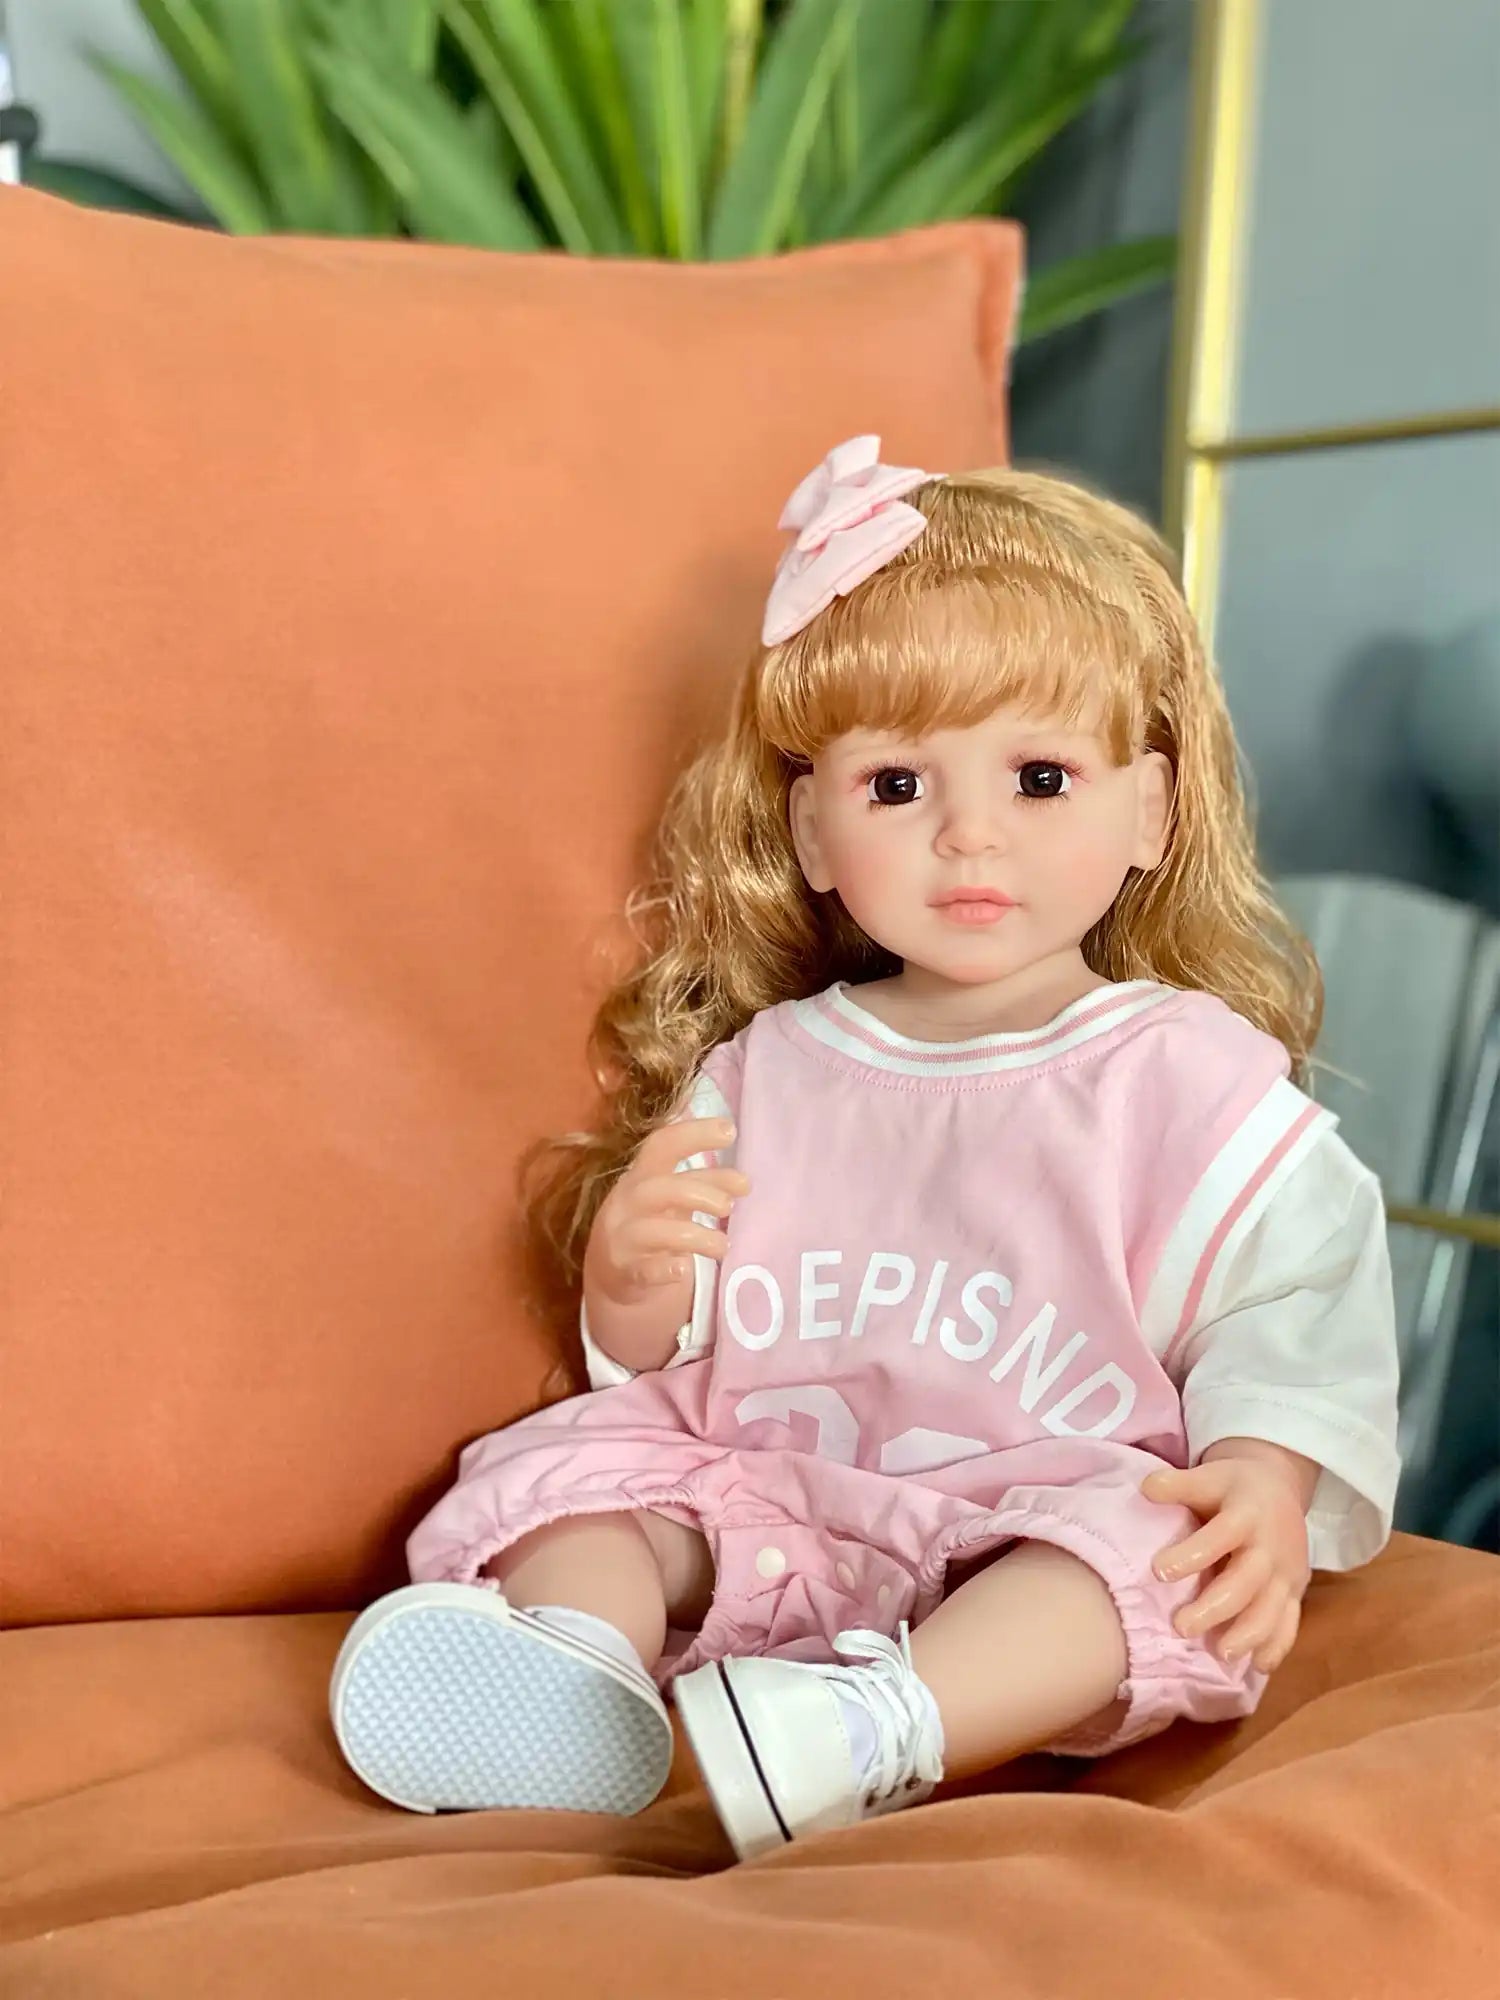 Realistic doll capturing a moment of childlike innocence, wearing a pink and white ensemble, against a holiday backdrop.